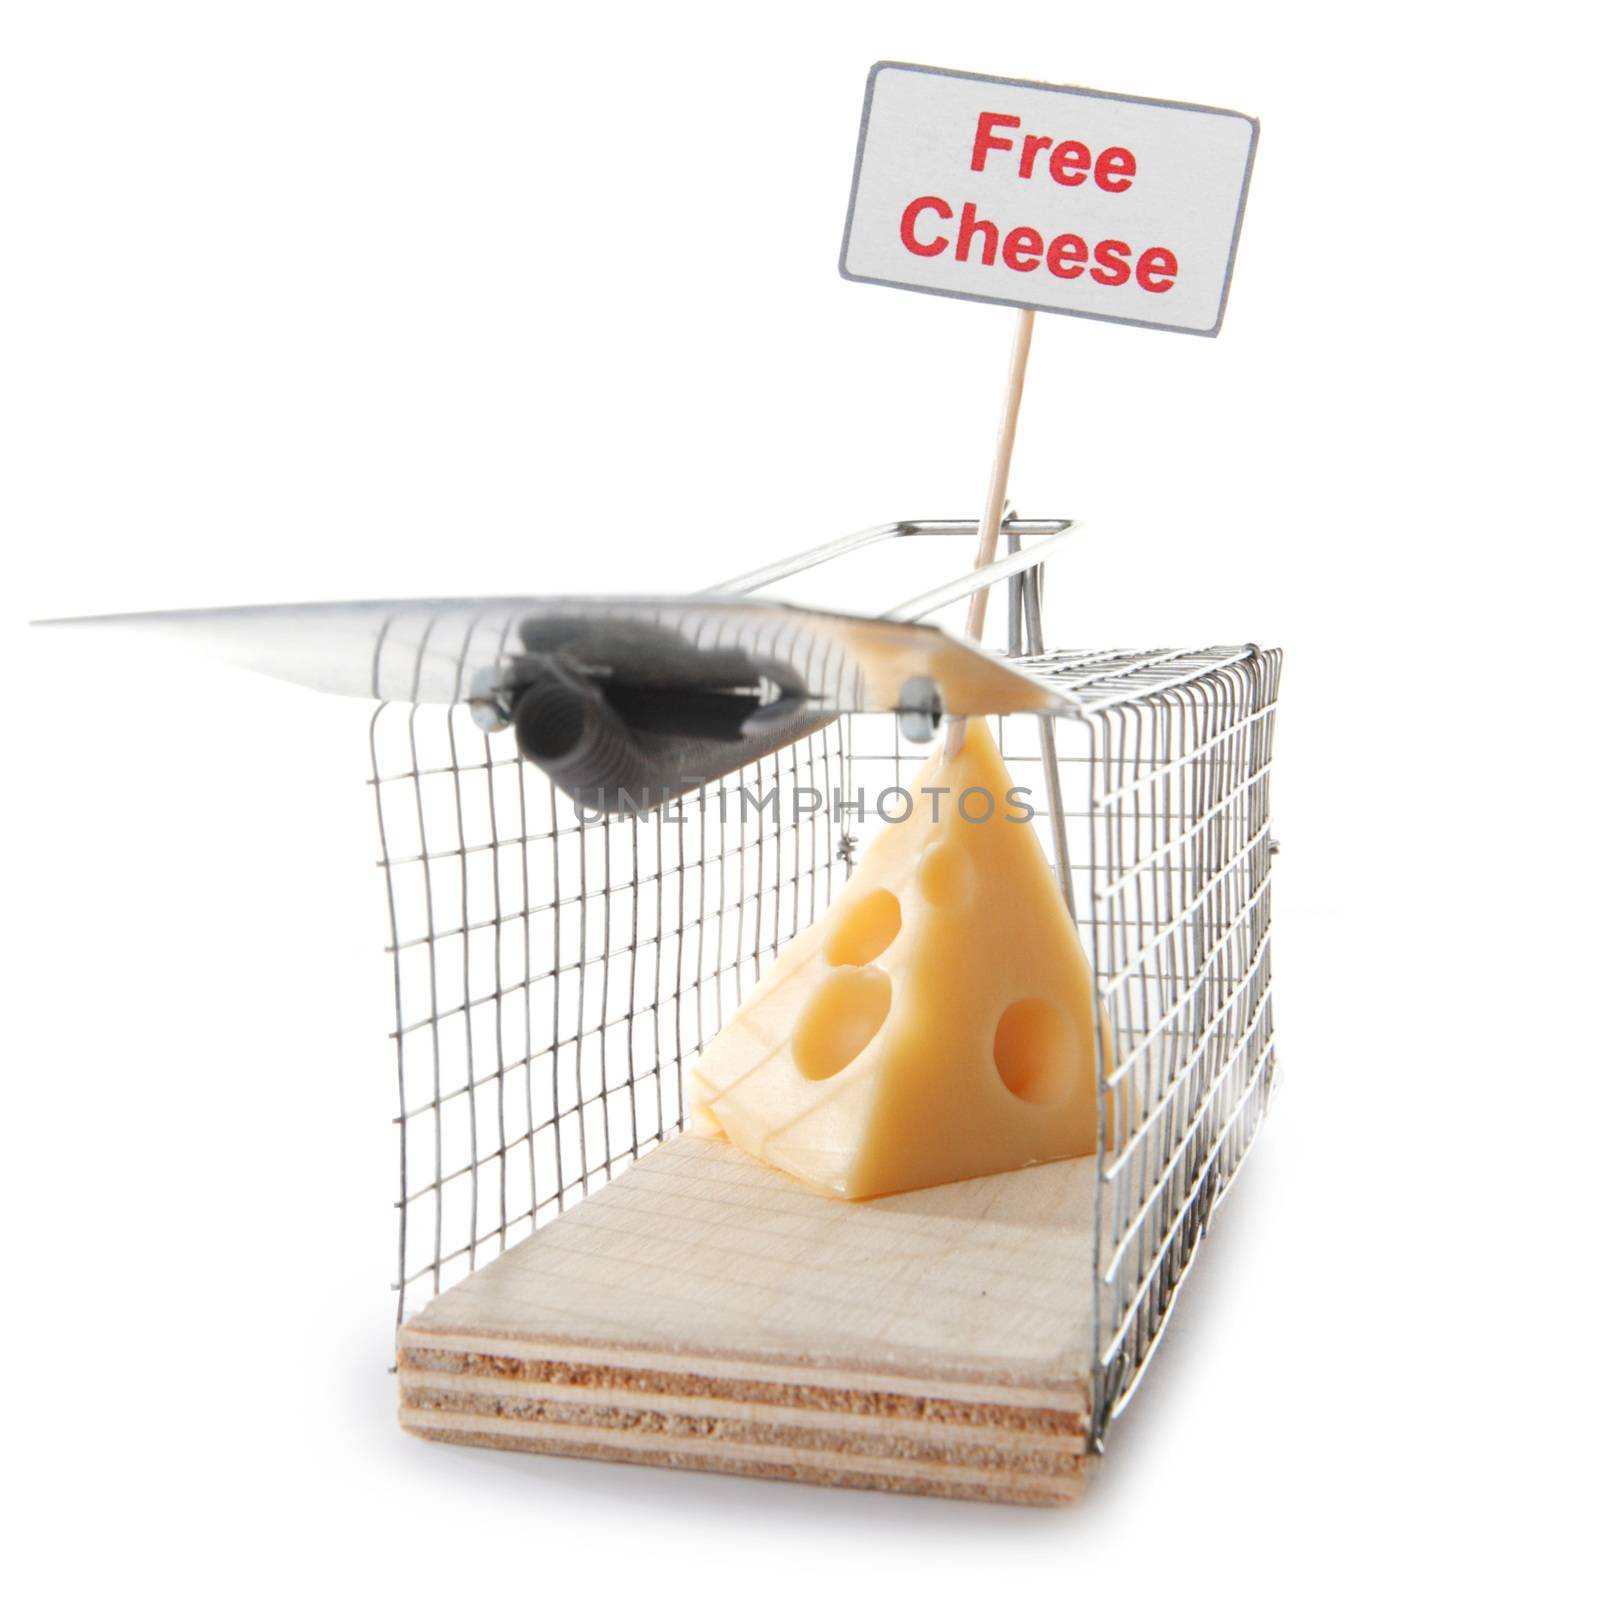 Mousetrap with free cheese by Yellowj